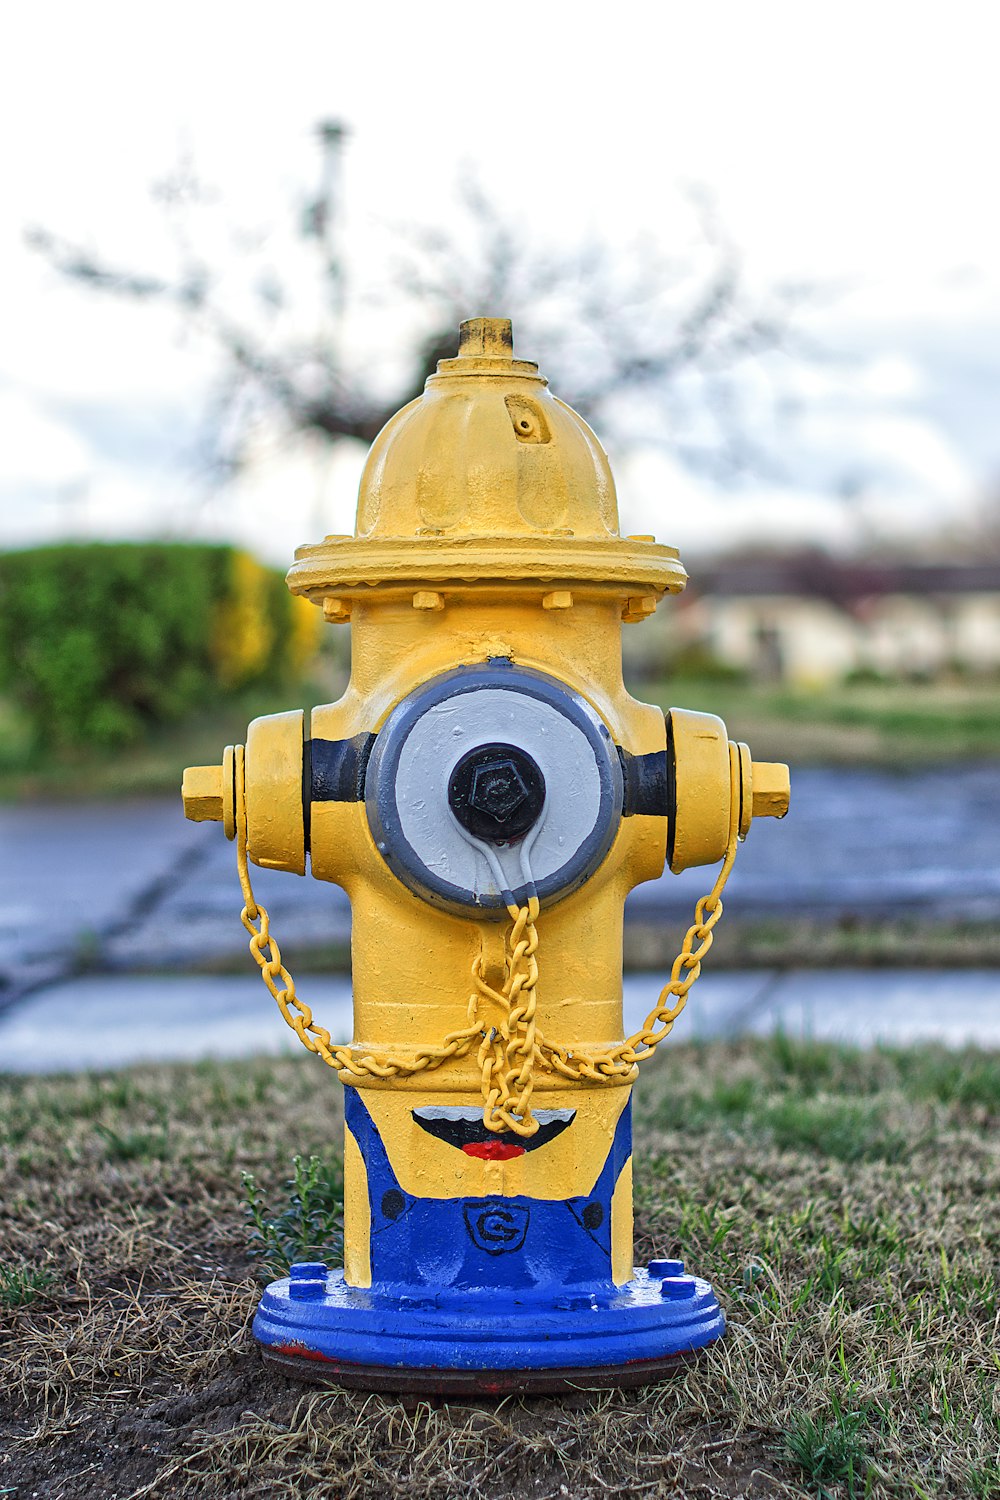 a yellow and blue fire hydrant sitting in the grass